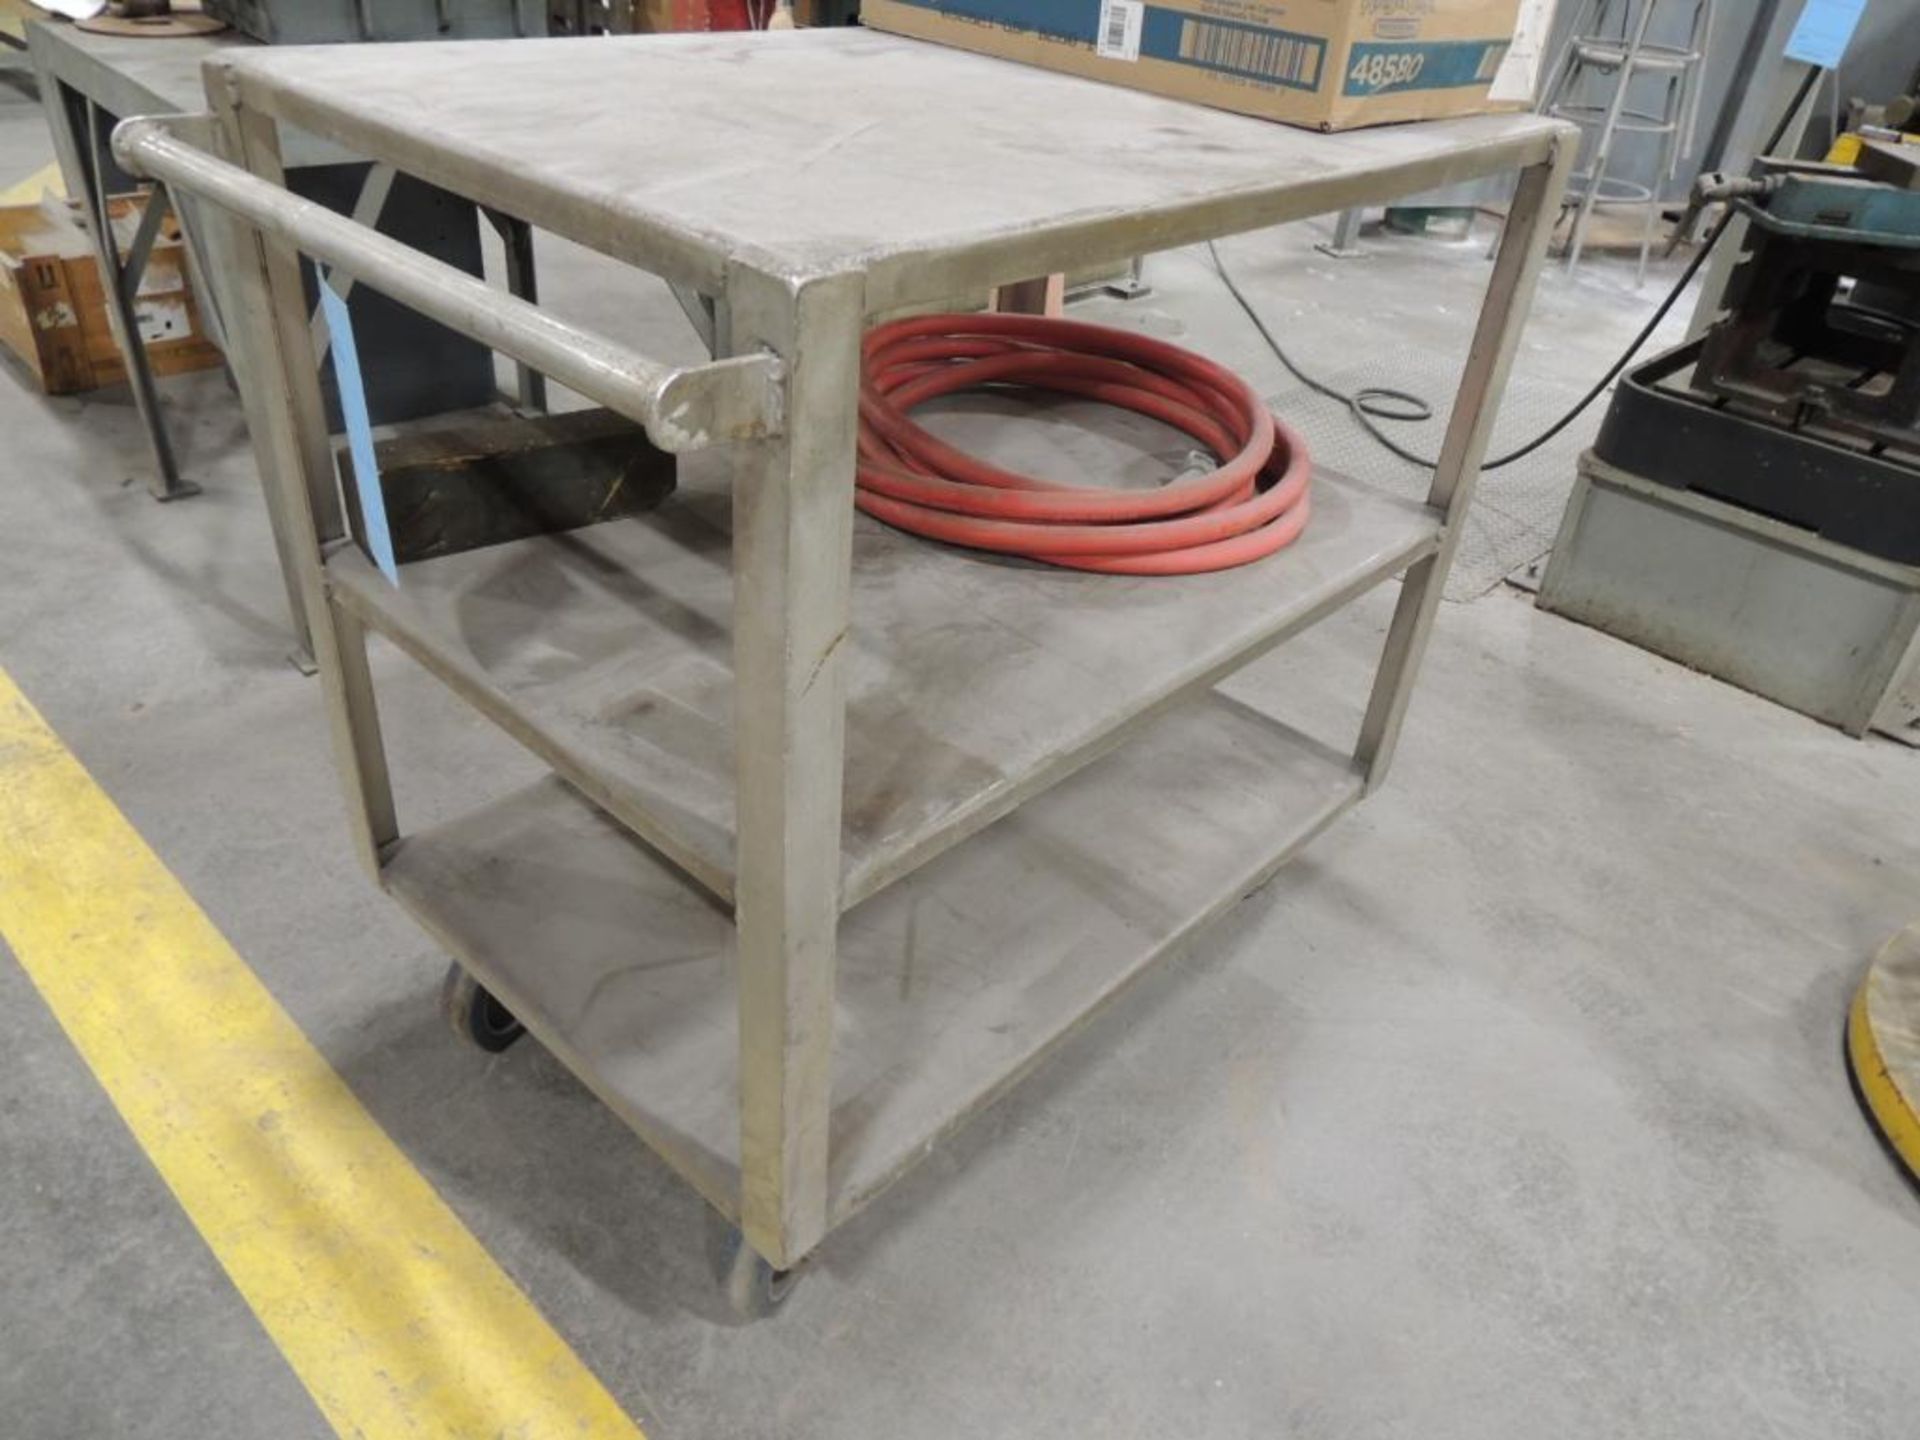 INDUSTRIAL CART/ TABLE ALUMINUM 28 IN. X 42 IN. X 41 IN. (Building T3)